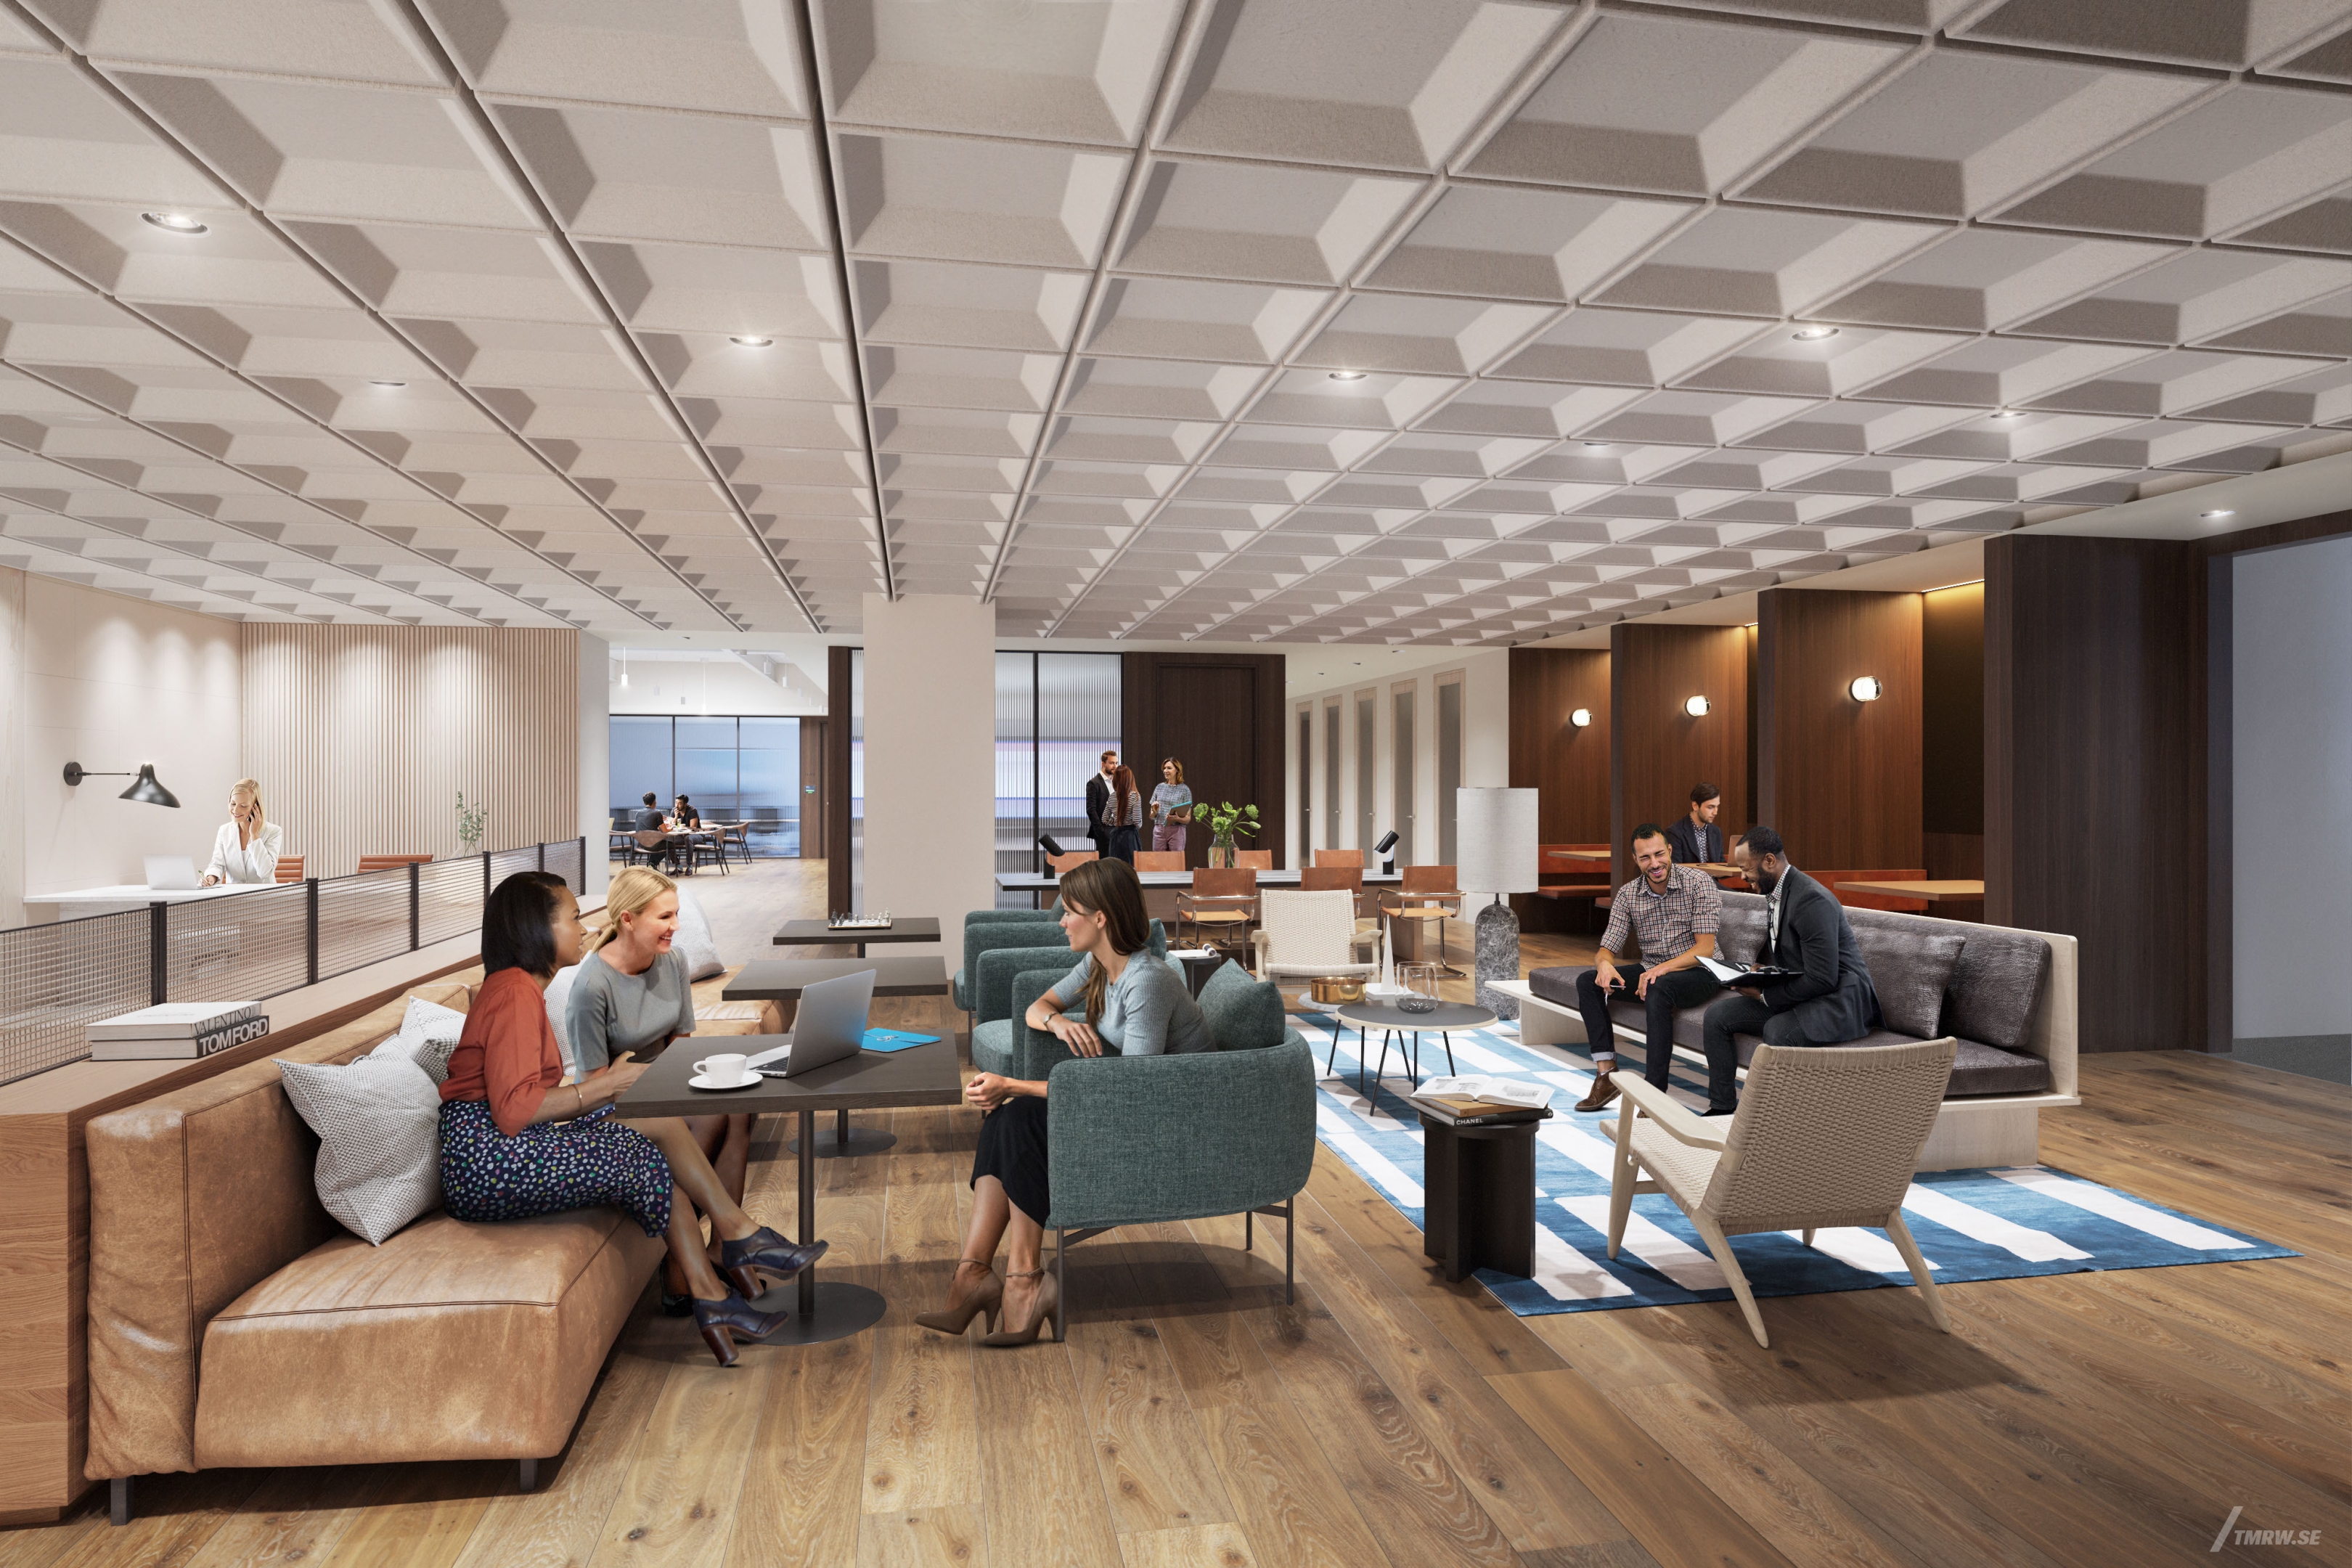 Architectural visualization of 225 Liberty for Brookfield Properties. An image of the interior of a office lobby with people sitting in the sofas in daylight.